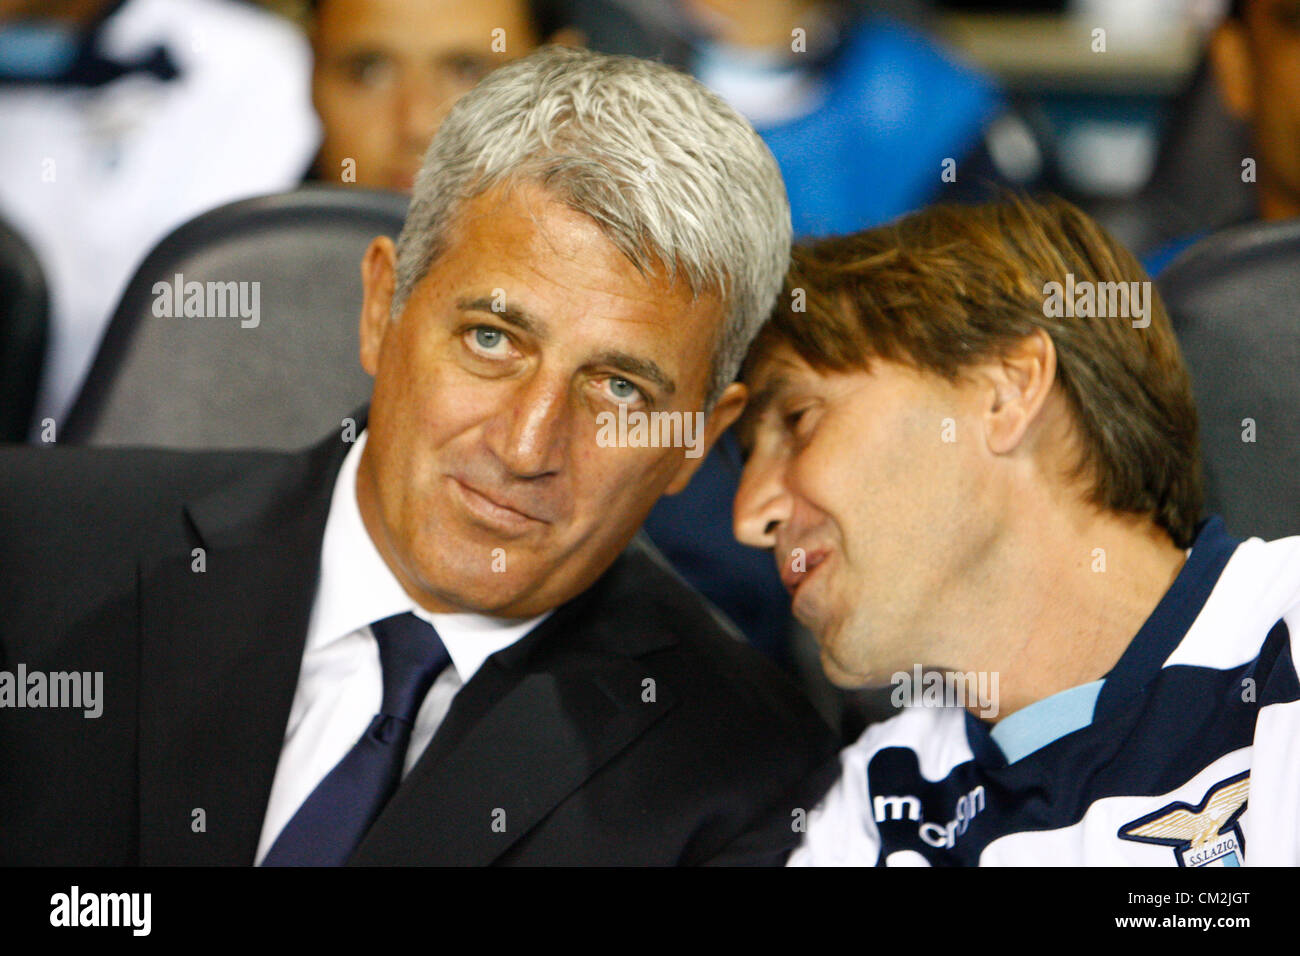 20.09.2012 London, ENGLAND:  Vladimir Petkovic Head Coach of S.S. Lazio in action during the Europa League Group J match between Tottenham Hotspur and SS Lazio at White Hart Lane Stadium Stock Photo